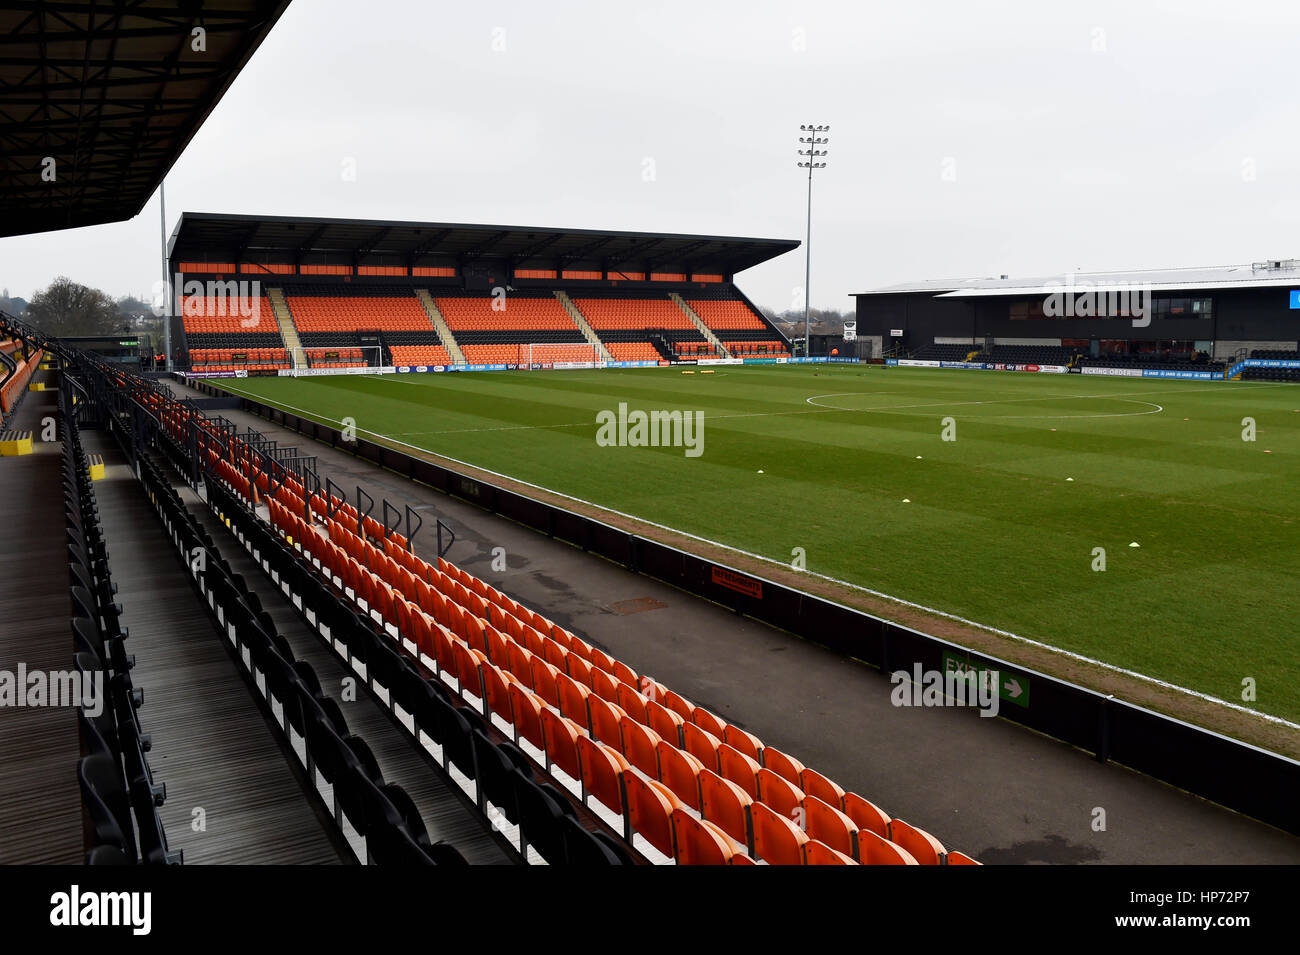 The Hive Stadium before the Sky Bet League 2 match between Barnet and Portsmouth at The Hive Stadium in London. February 18, 2017. Simon  Dack / Telephoto Images - Editorial use only. No merchandising. For Football images FA and Premier League restrictions apply inc. no internet/mobile usage without FAPL license - for details contact Football Dataco Stock Photo